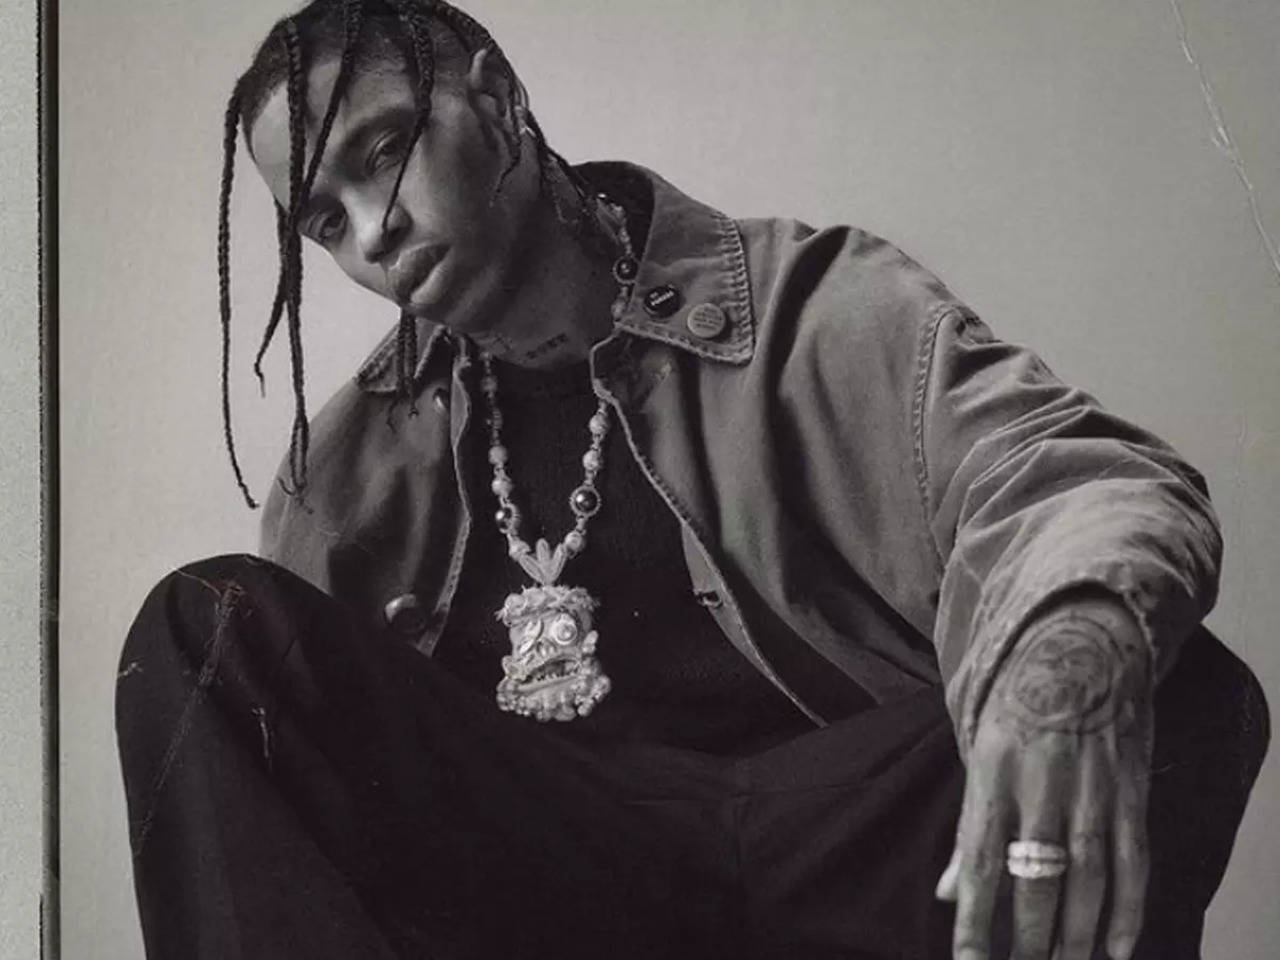 Deaths at Travis Scott concert due to accidental suffocation, medical  examiner says